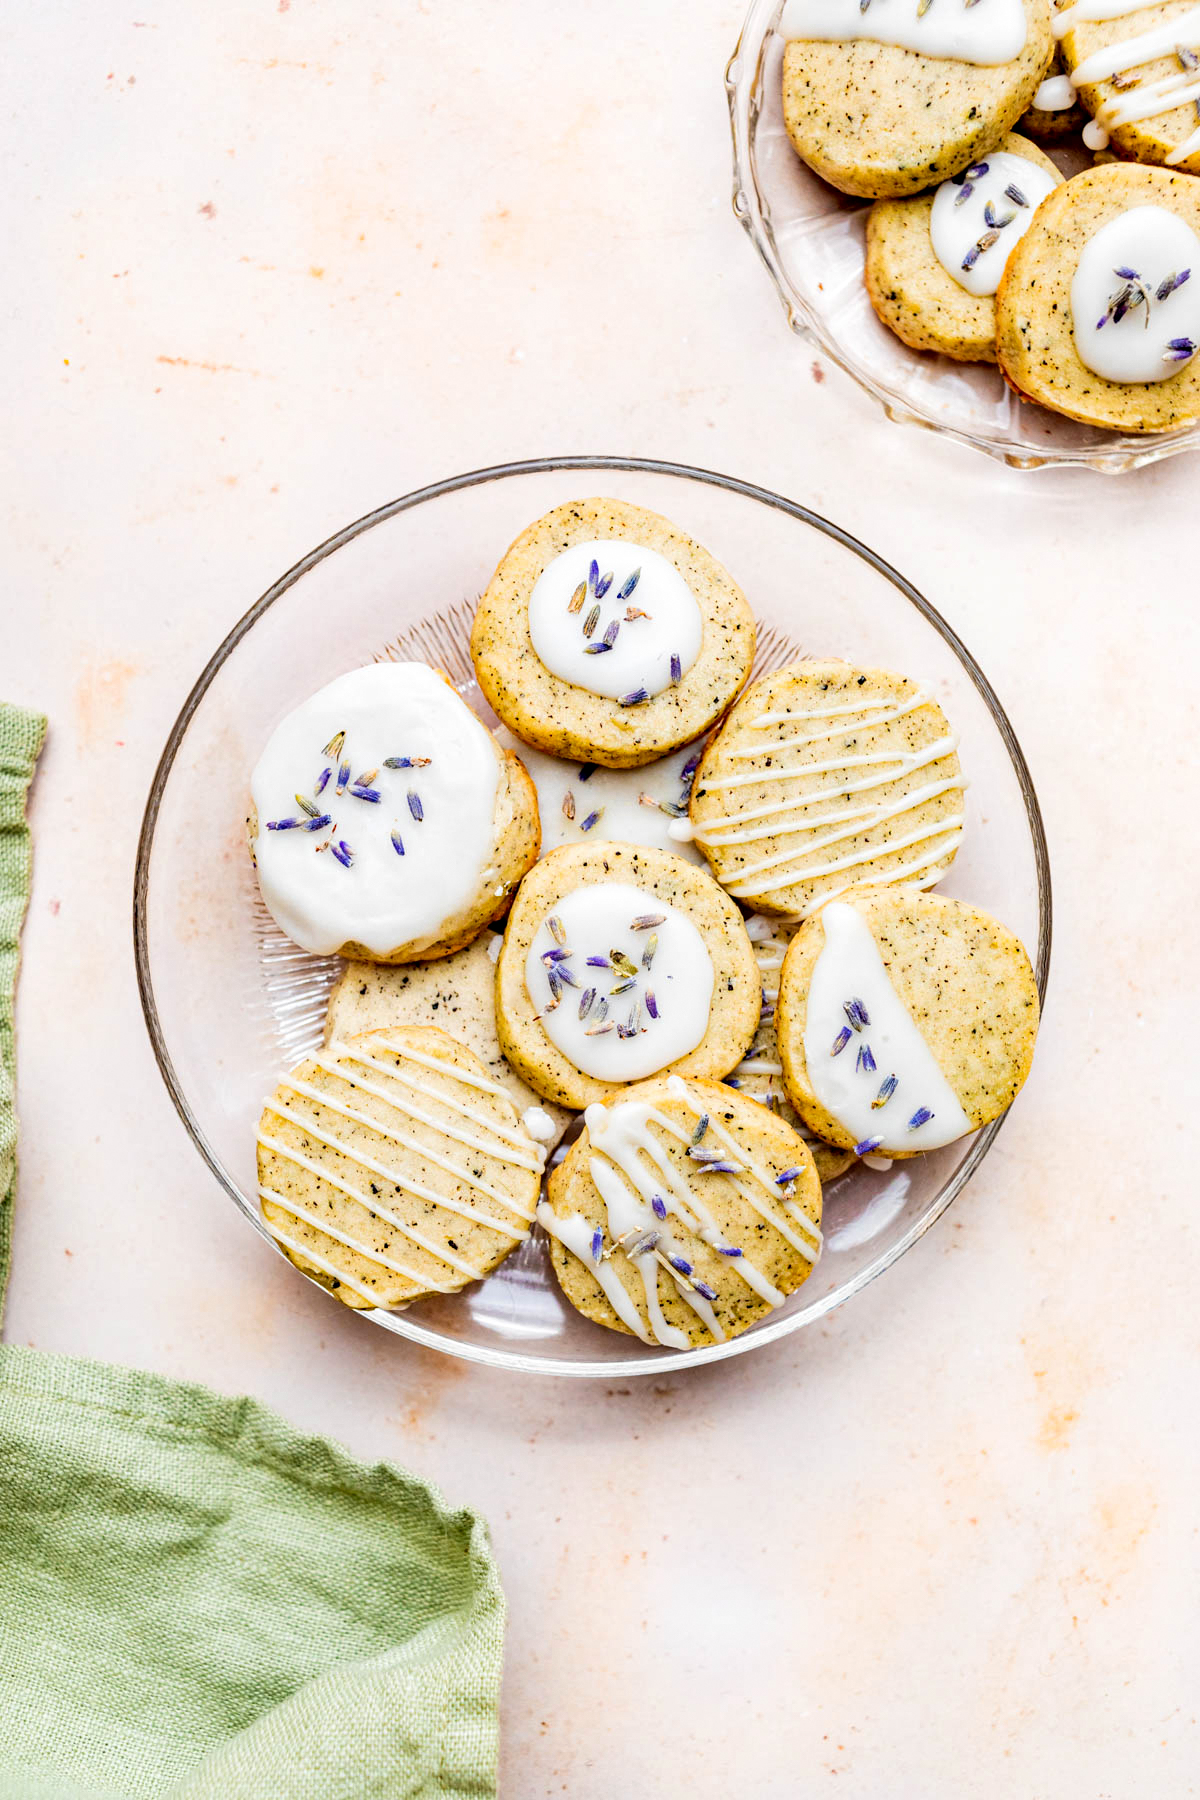 A bowl full of cookies, some with icing.